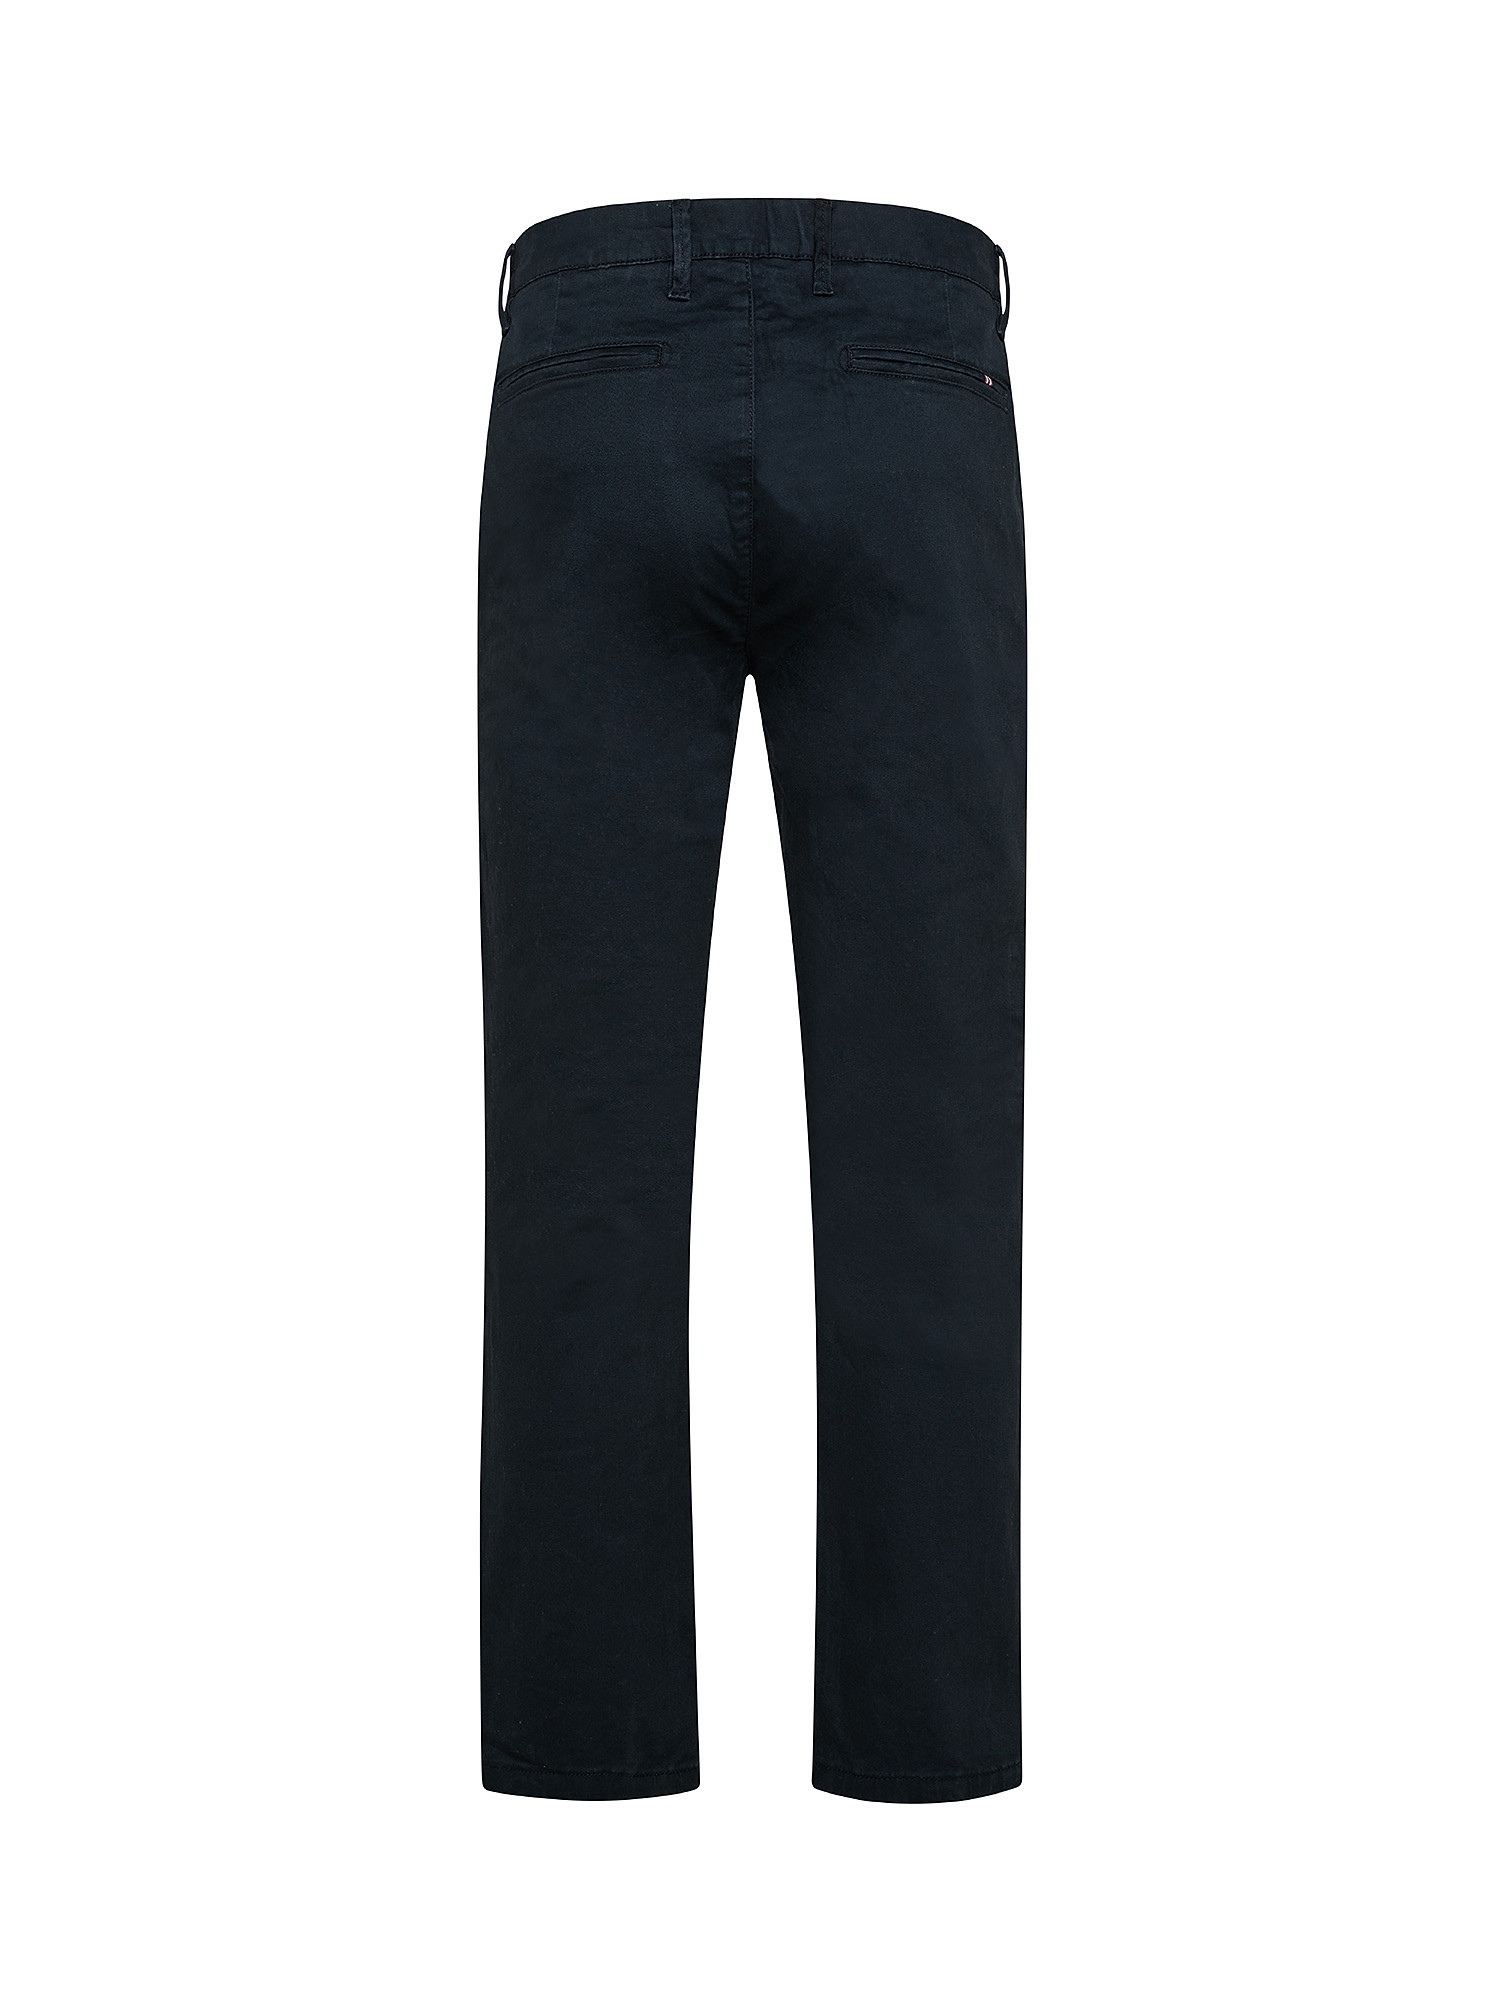 Pantalone chinos in cotone stretch, Blu scuro, large image number 1